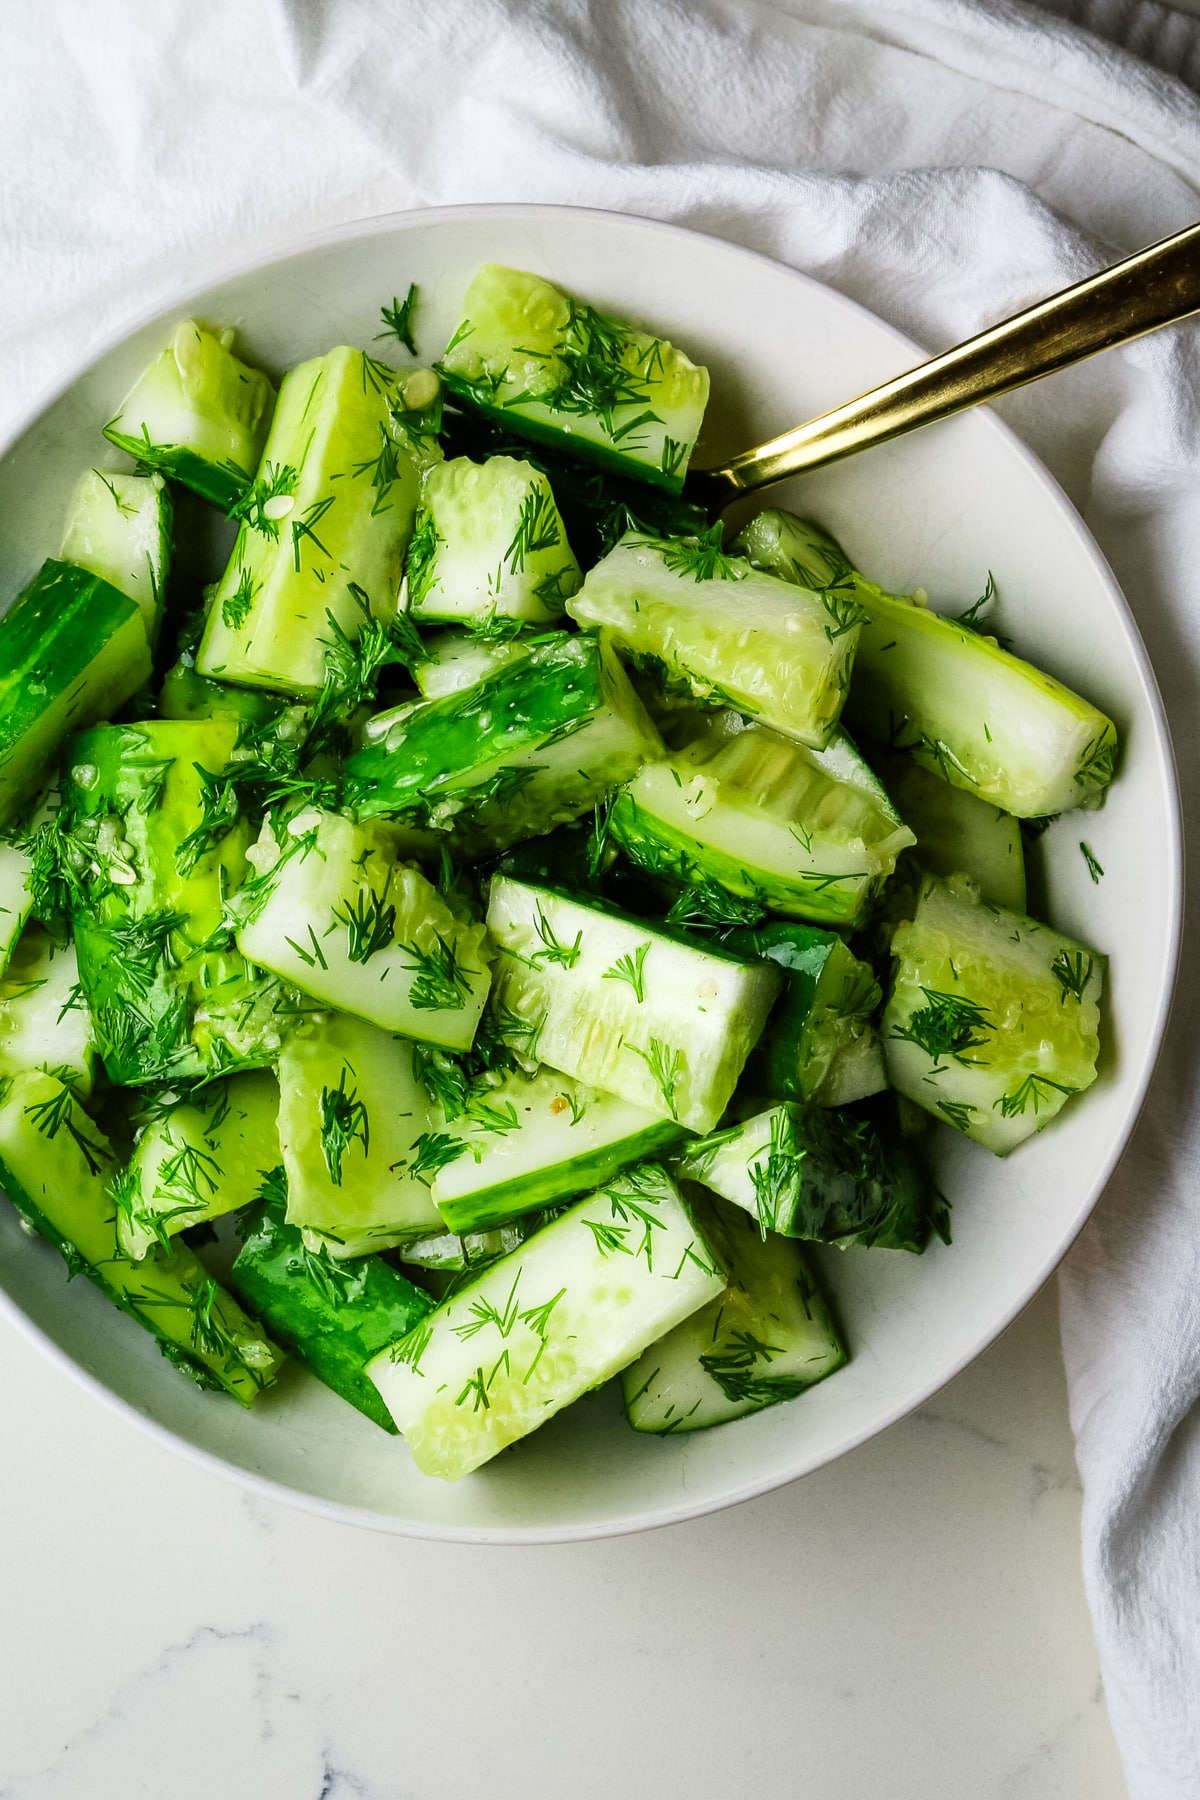 Cucumbers cut up into bite size pieces in a white bowl.